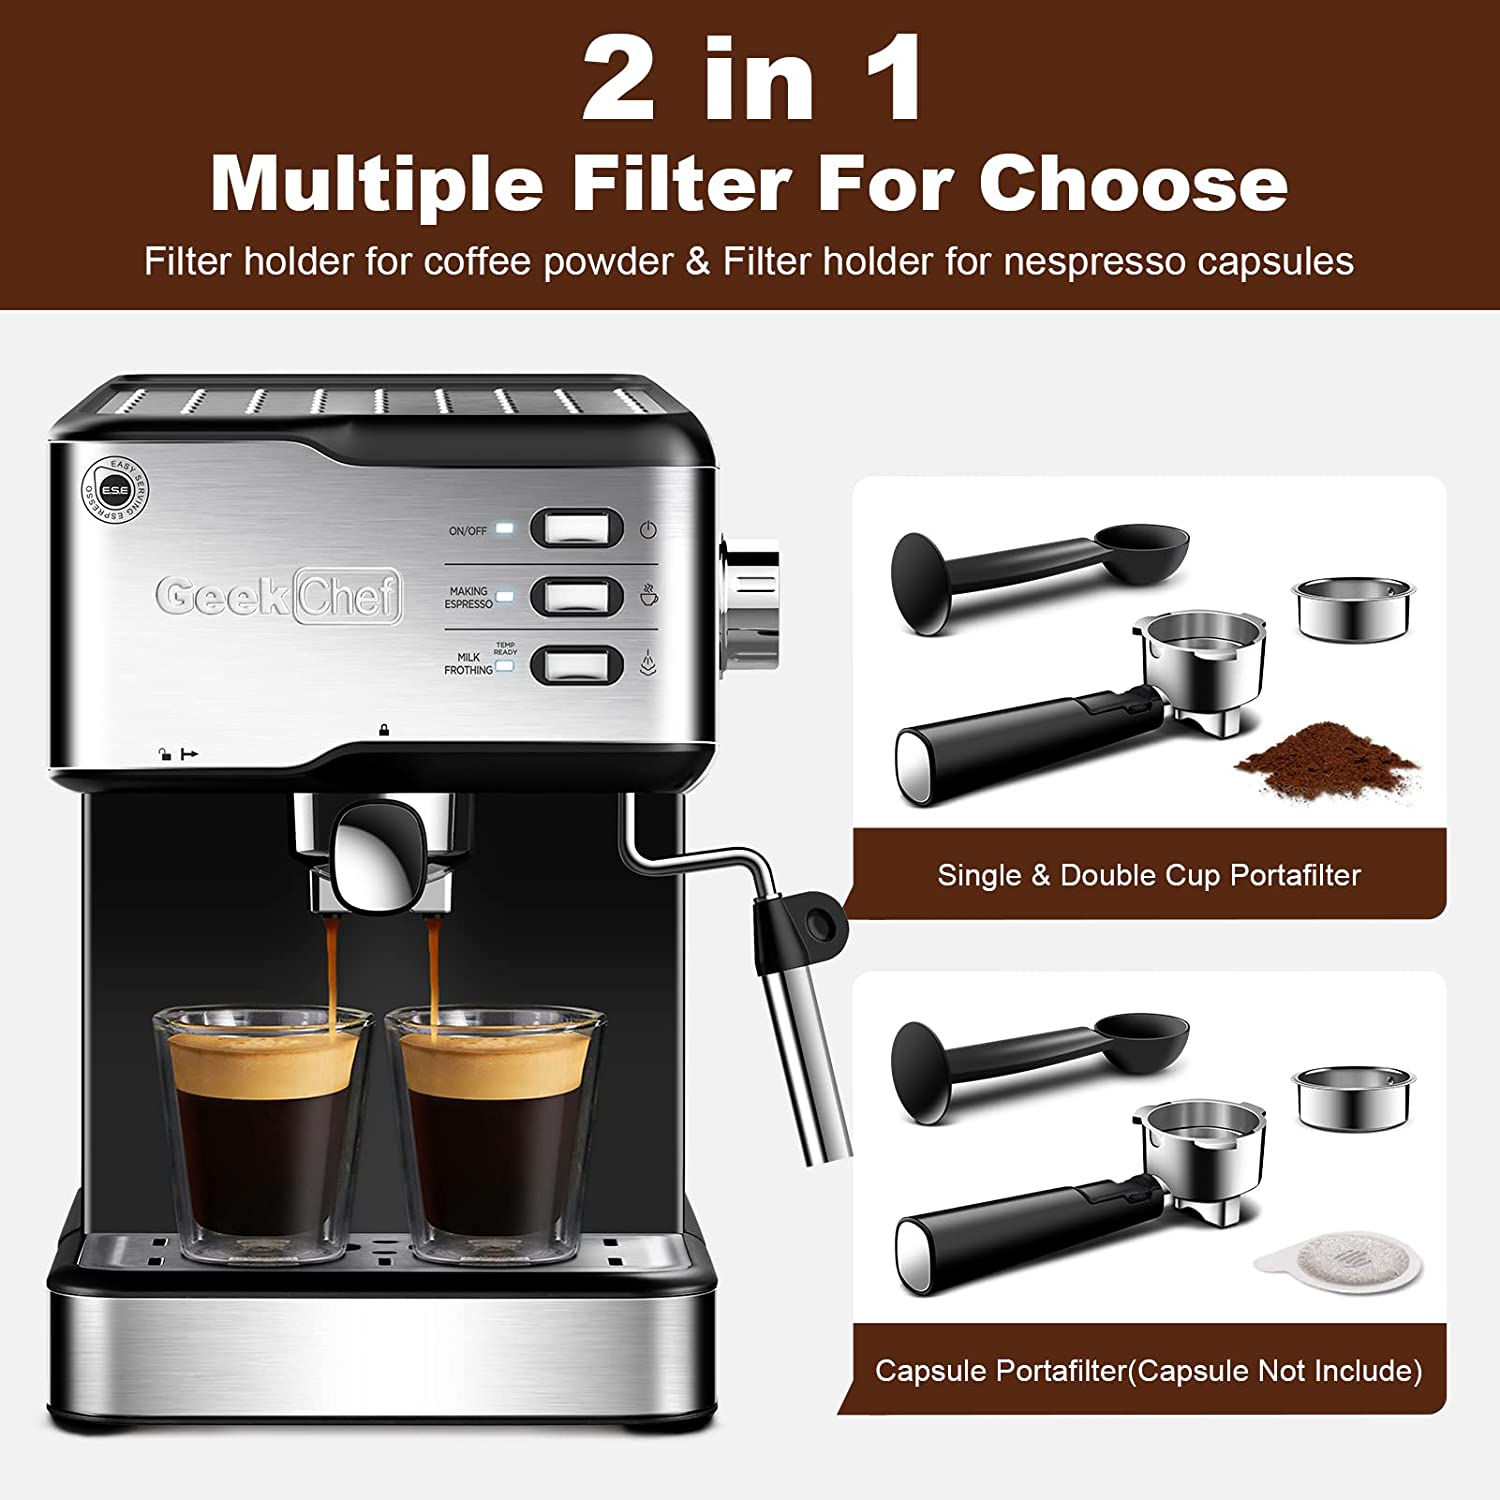 Gevi 4-Cup Coffee Maker with Auto-Shut Off, Small Drip Coffeemaker Compact  Coffee Pot Brewer Machine with Cone Filter, Glass Carafe and Hot Plate,  Stainless Steel Finish